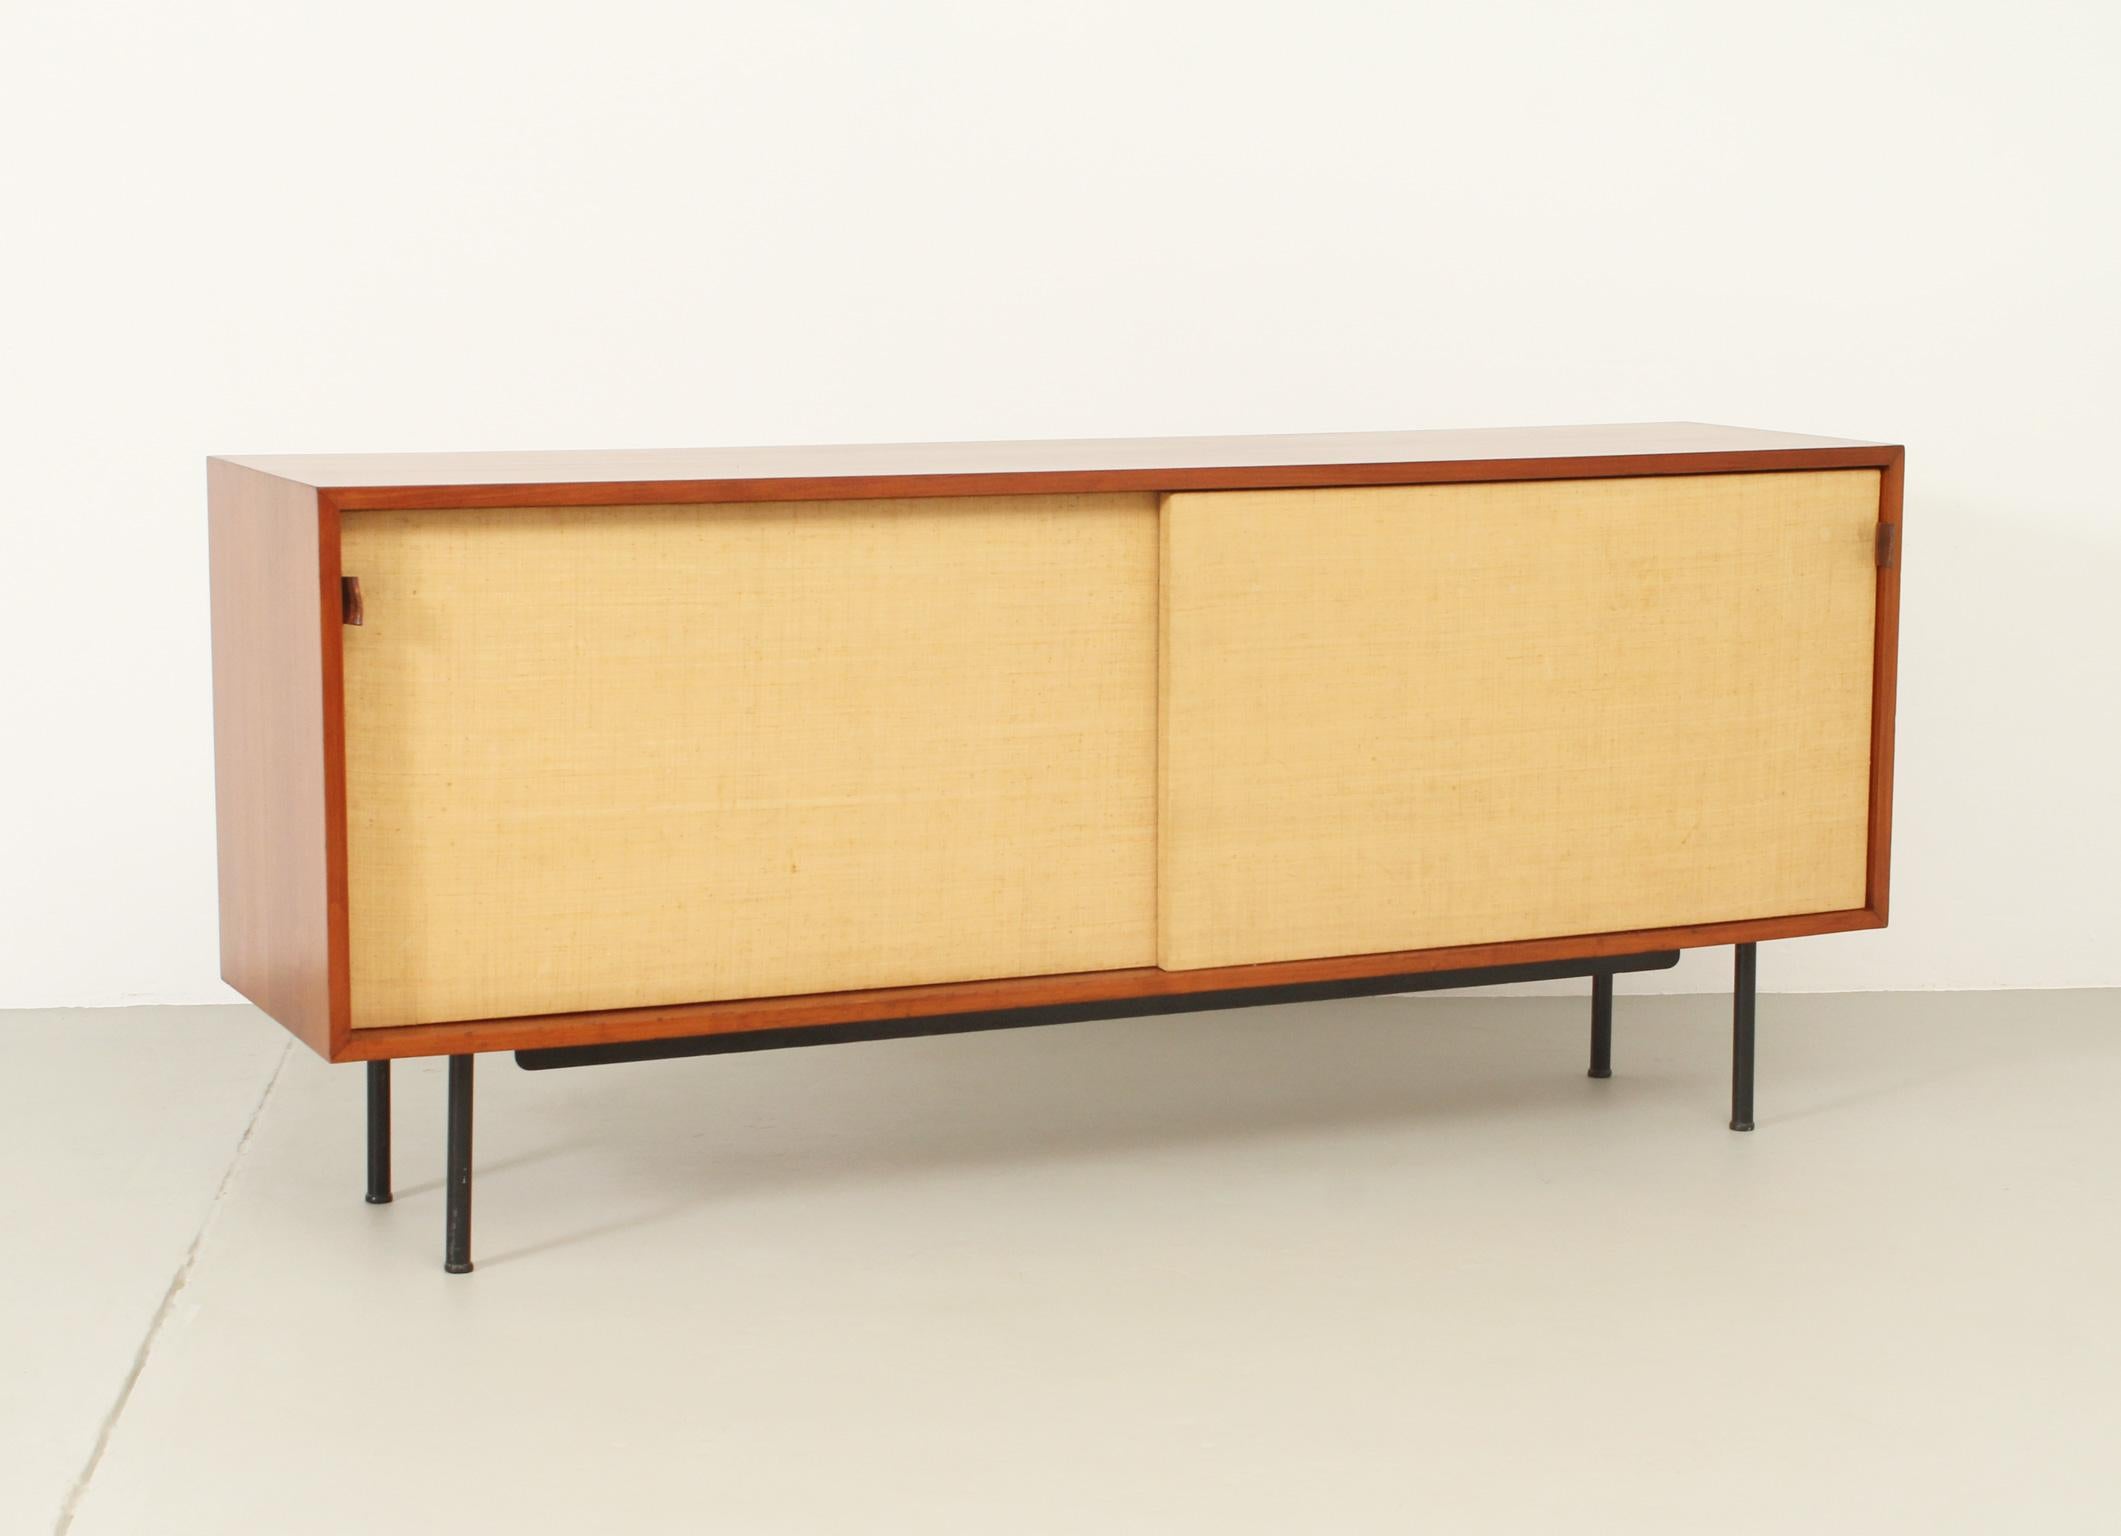 Sideboard model 116 designed by Florence Knoll in 1948 for Knoll International, USA. Early edition in teak wood with original seagrass covered sliding doors and brown leather handles, black metal bases.